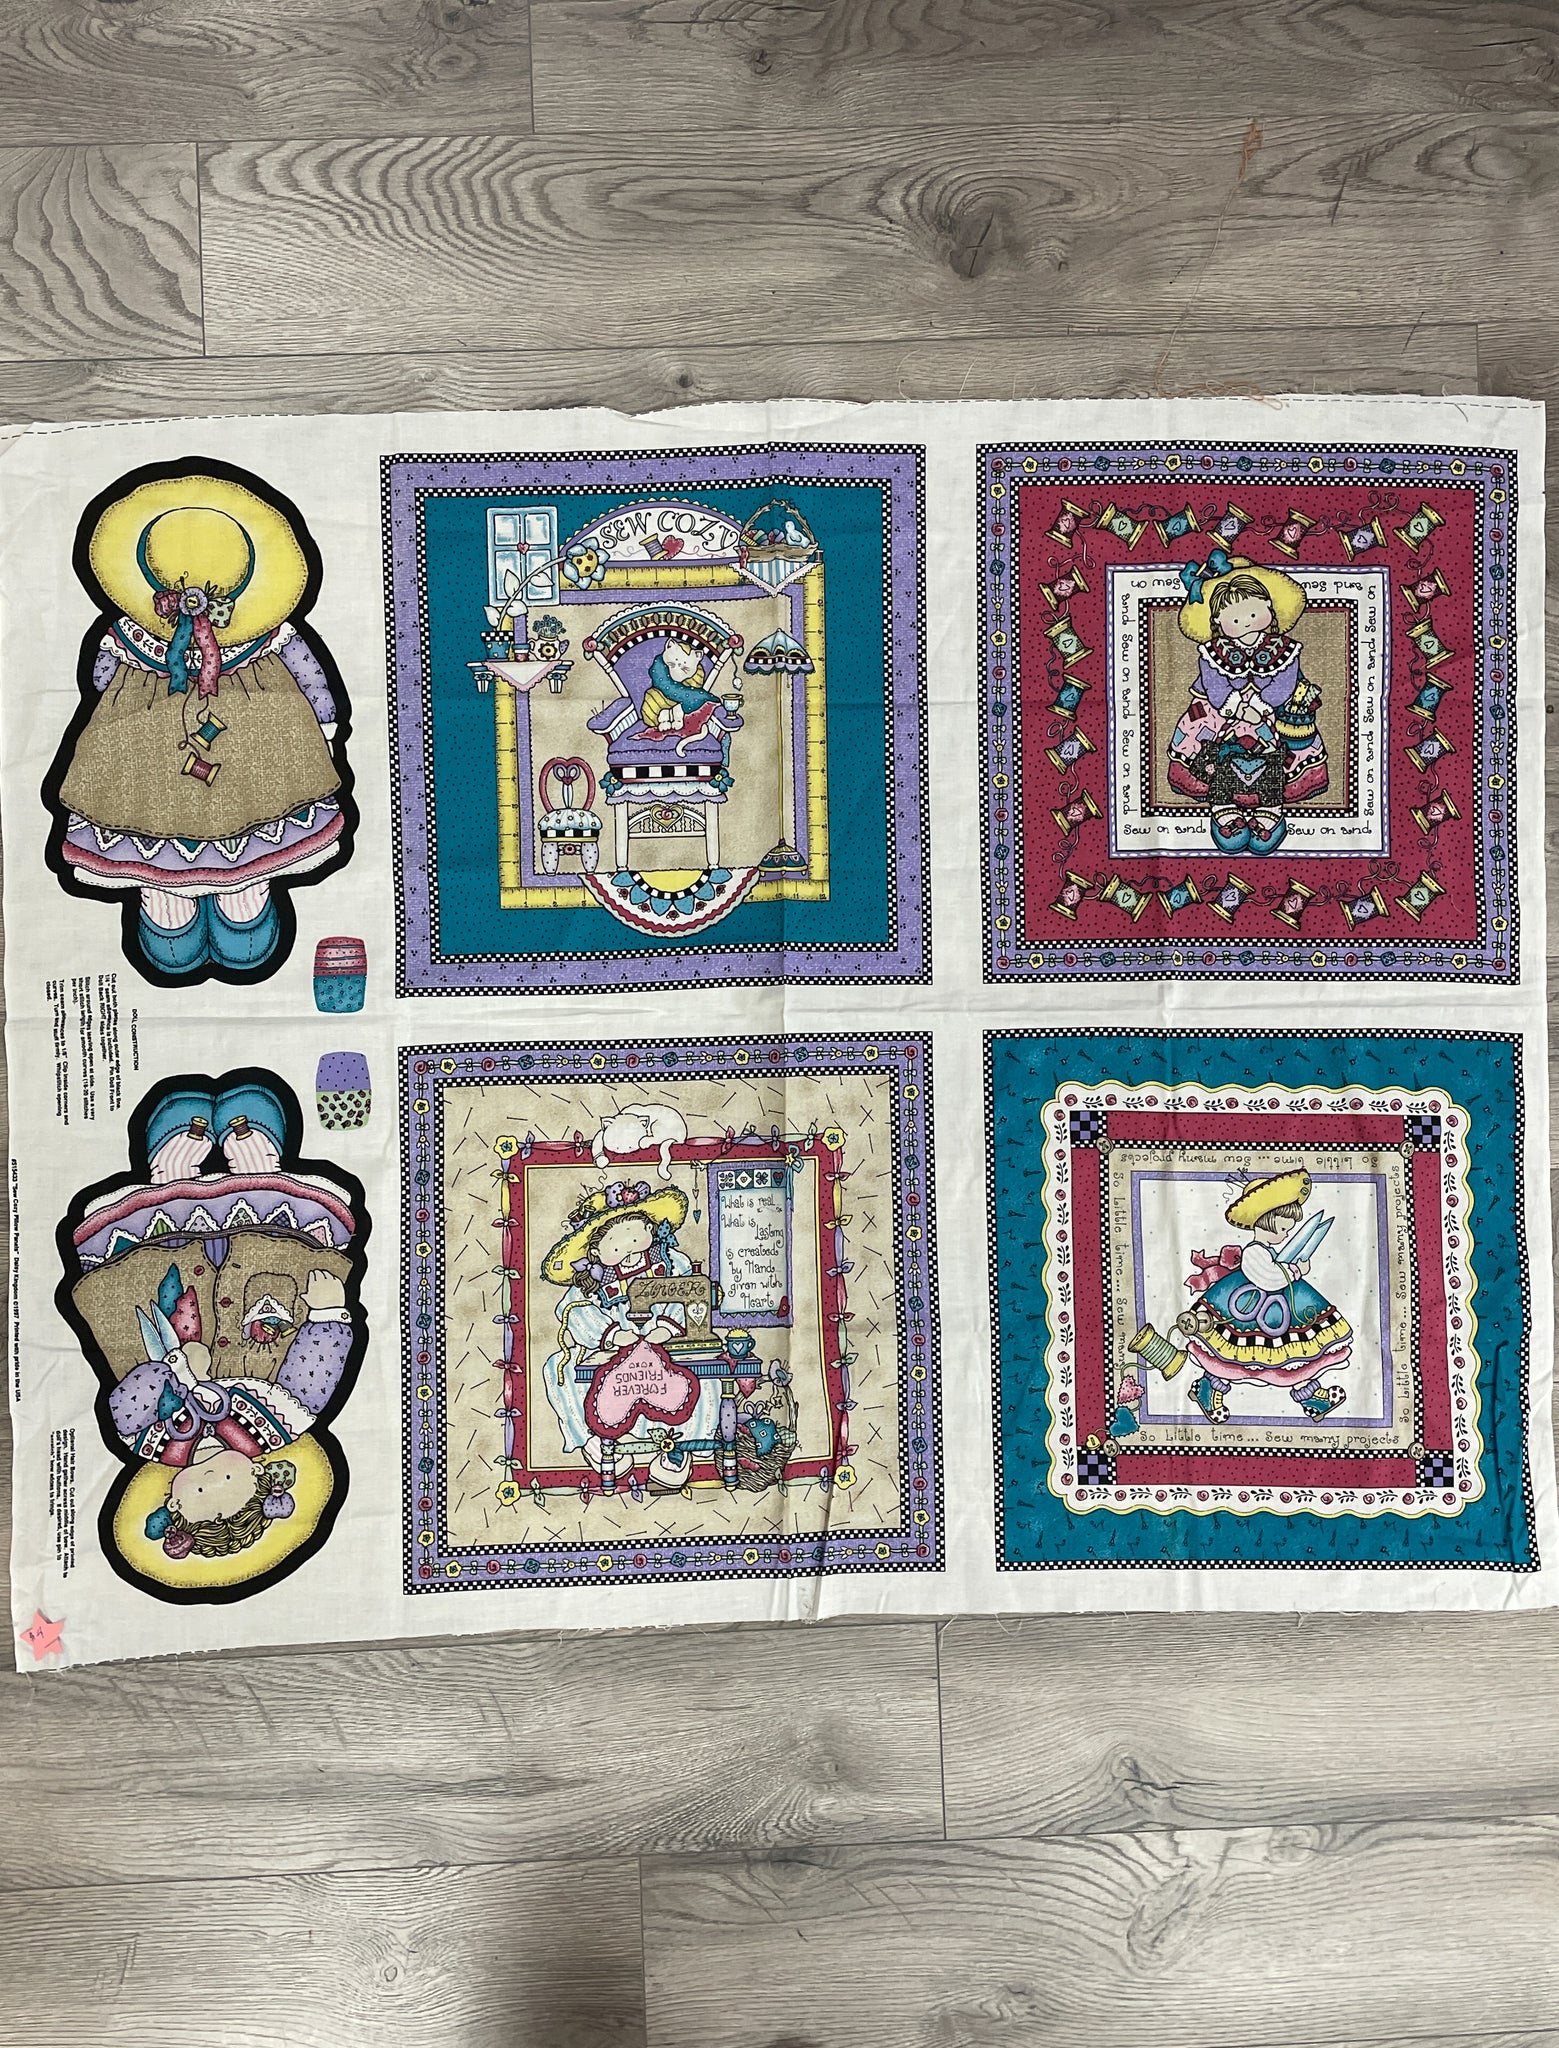 1997 Quilting Cotton Panel Vintage - Pillows and Stuffed Doll